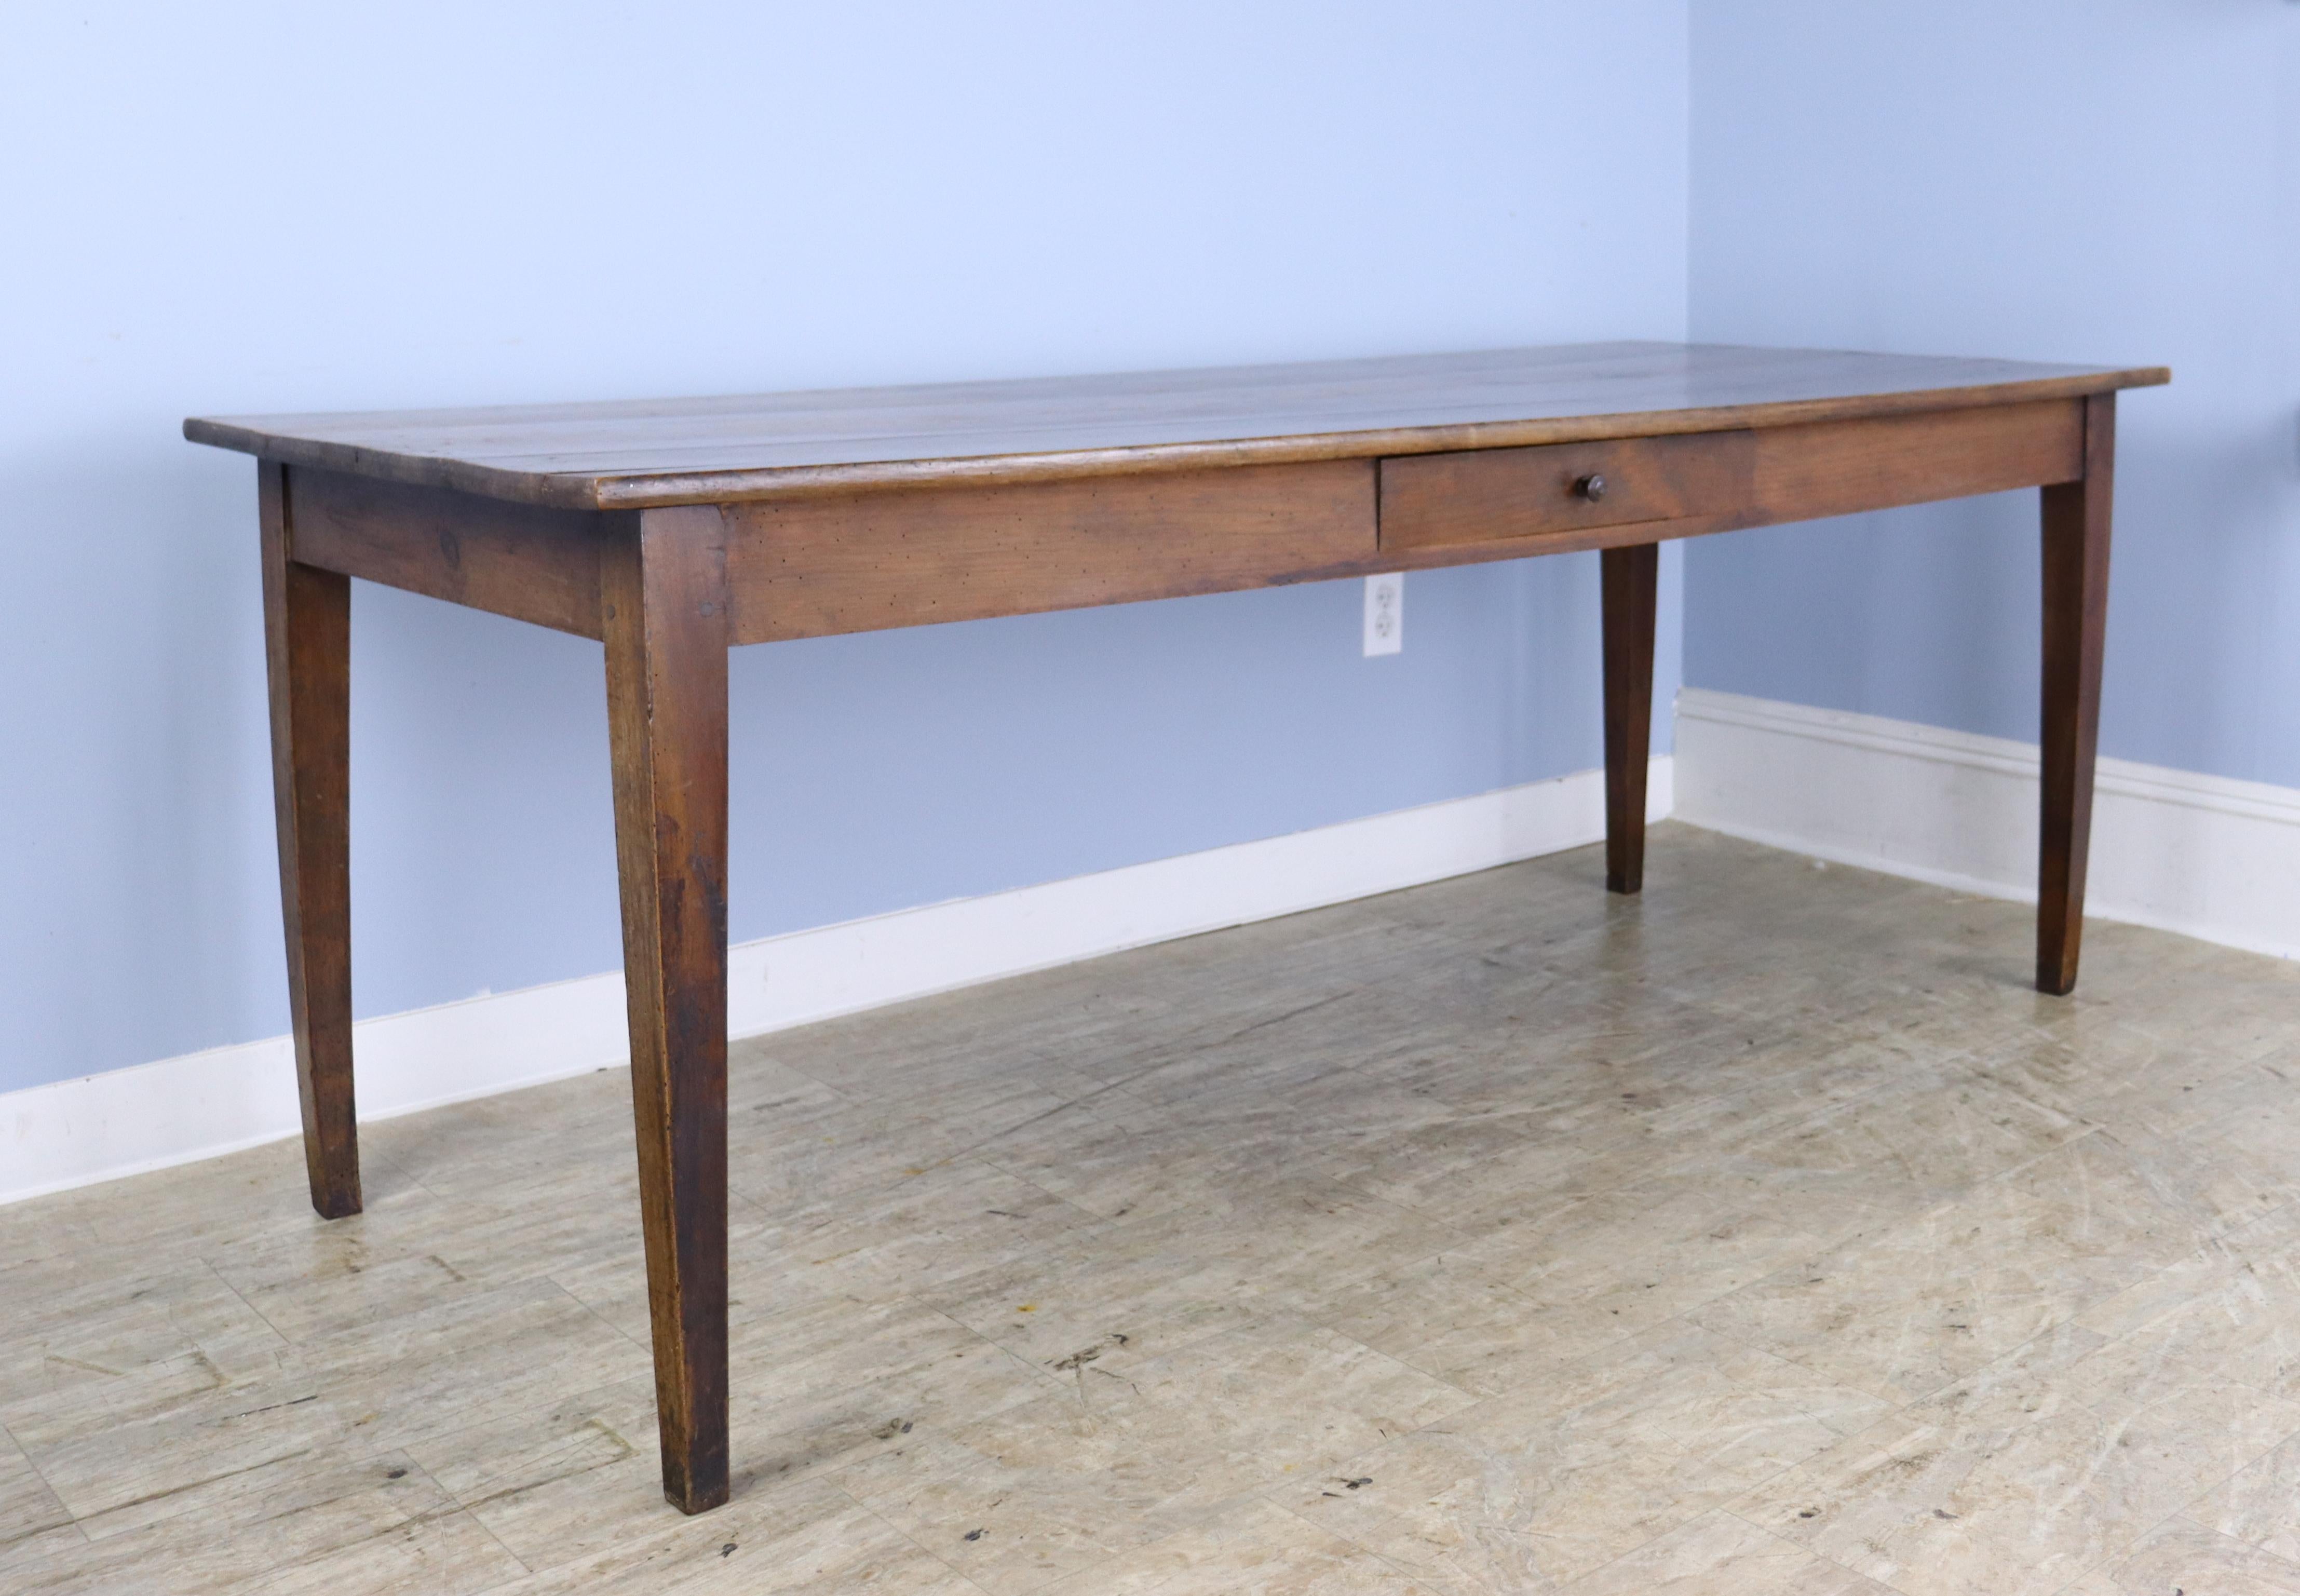 A simple elegant pine dining or farm table with good pine grain and color.  The top is is in nice condition and has one old repair, shown in thumbnails.  The apron height of 24 inches is good for knees and there are 70.25 inches between the legs on